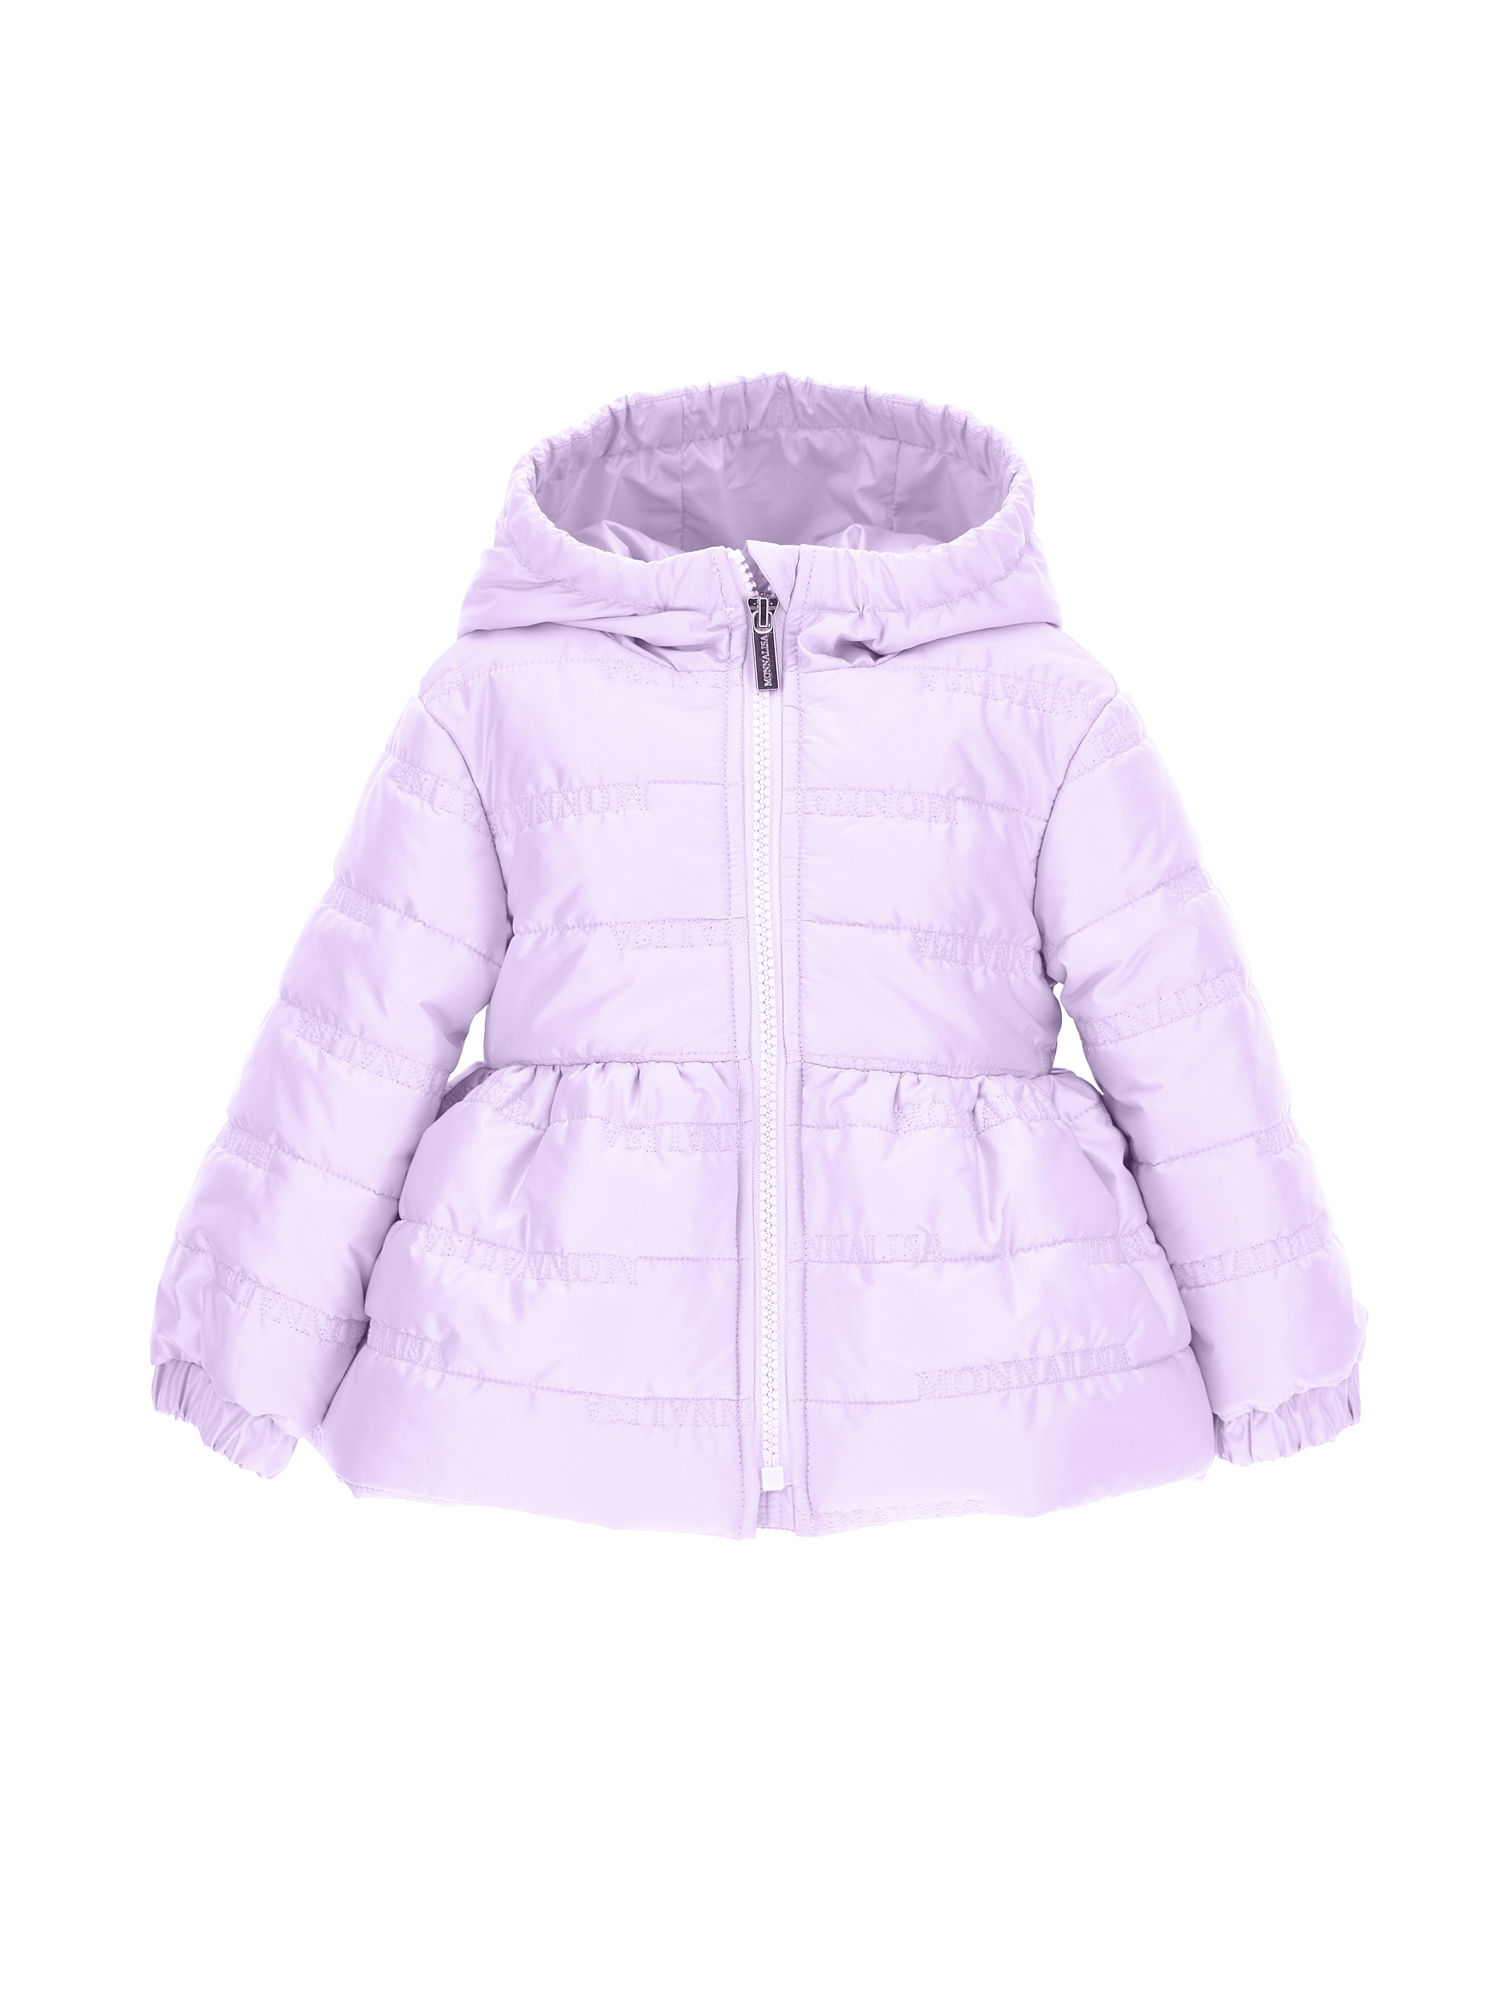 Monnalisa Extralight Jacket With Hood In Wisteria